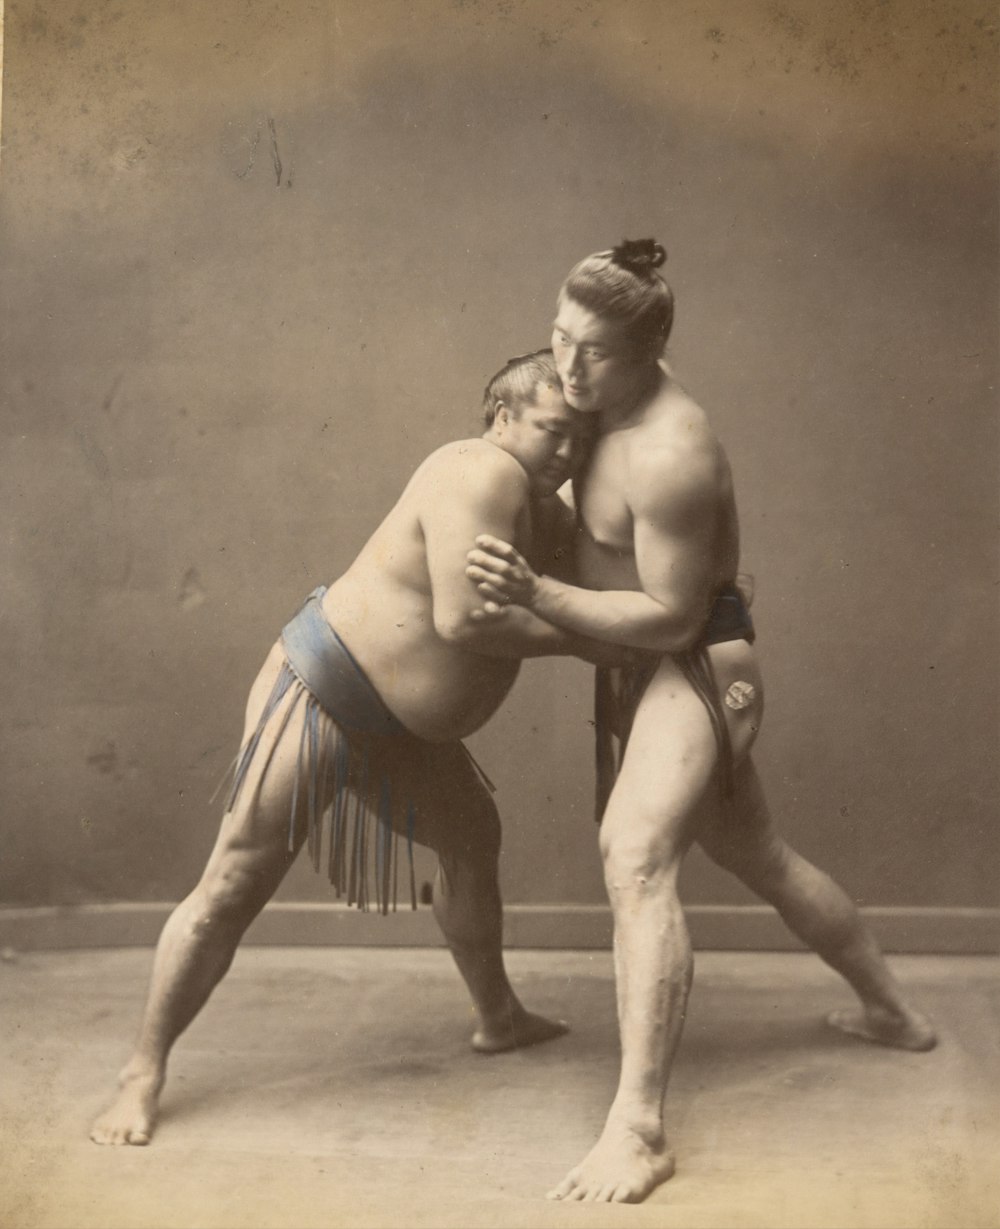 Historical image of sumo wrestlers in 1870